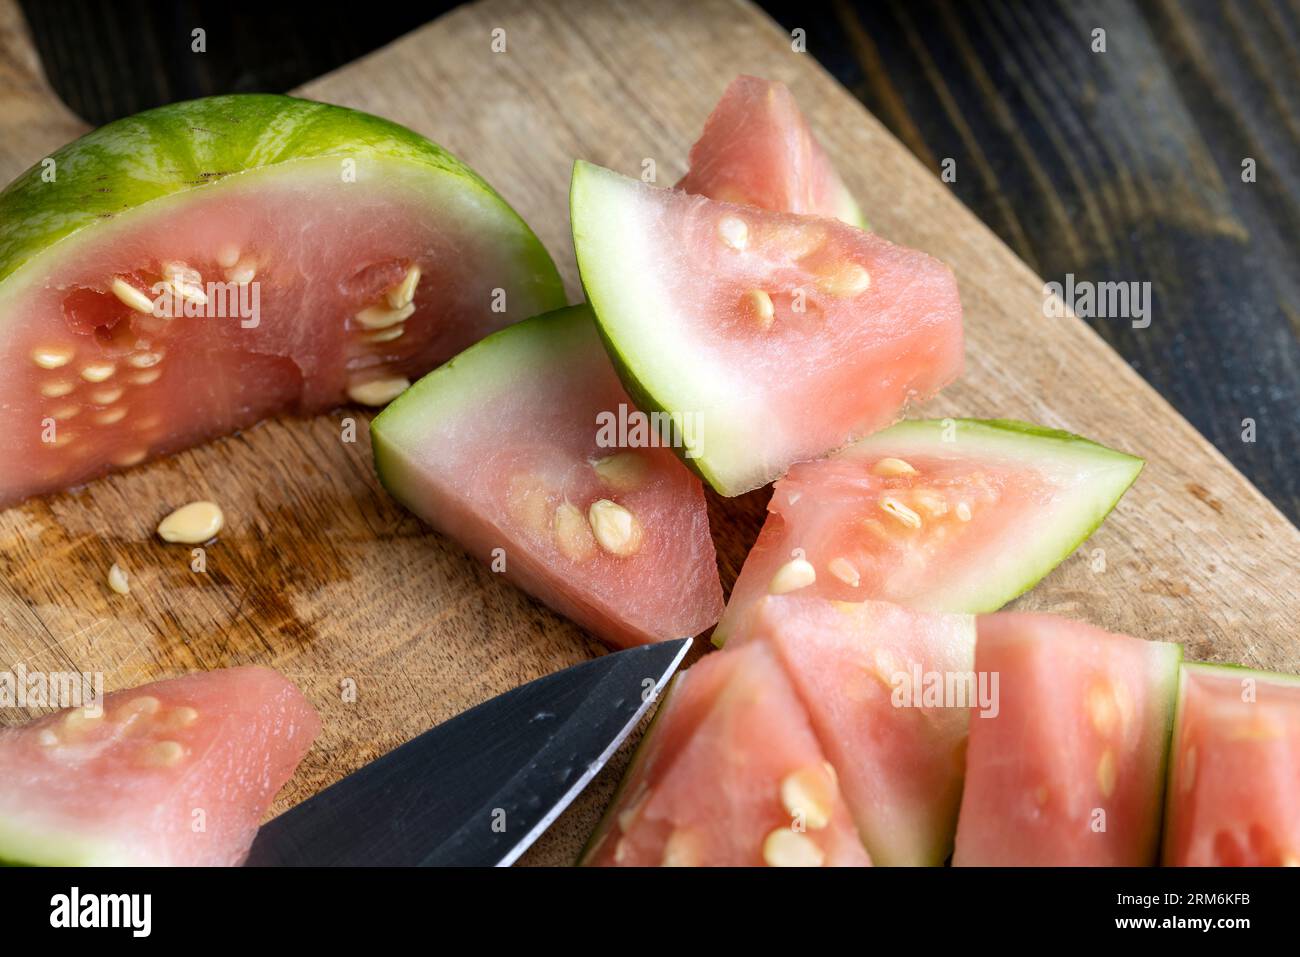 not sweet not ripe cut watermelon, Unripe watermelon of small size with large white seeds and light pink flesh Stock Photo